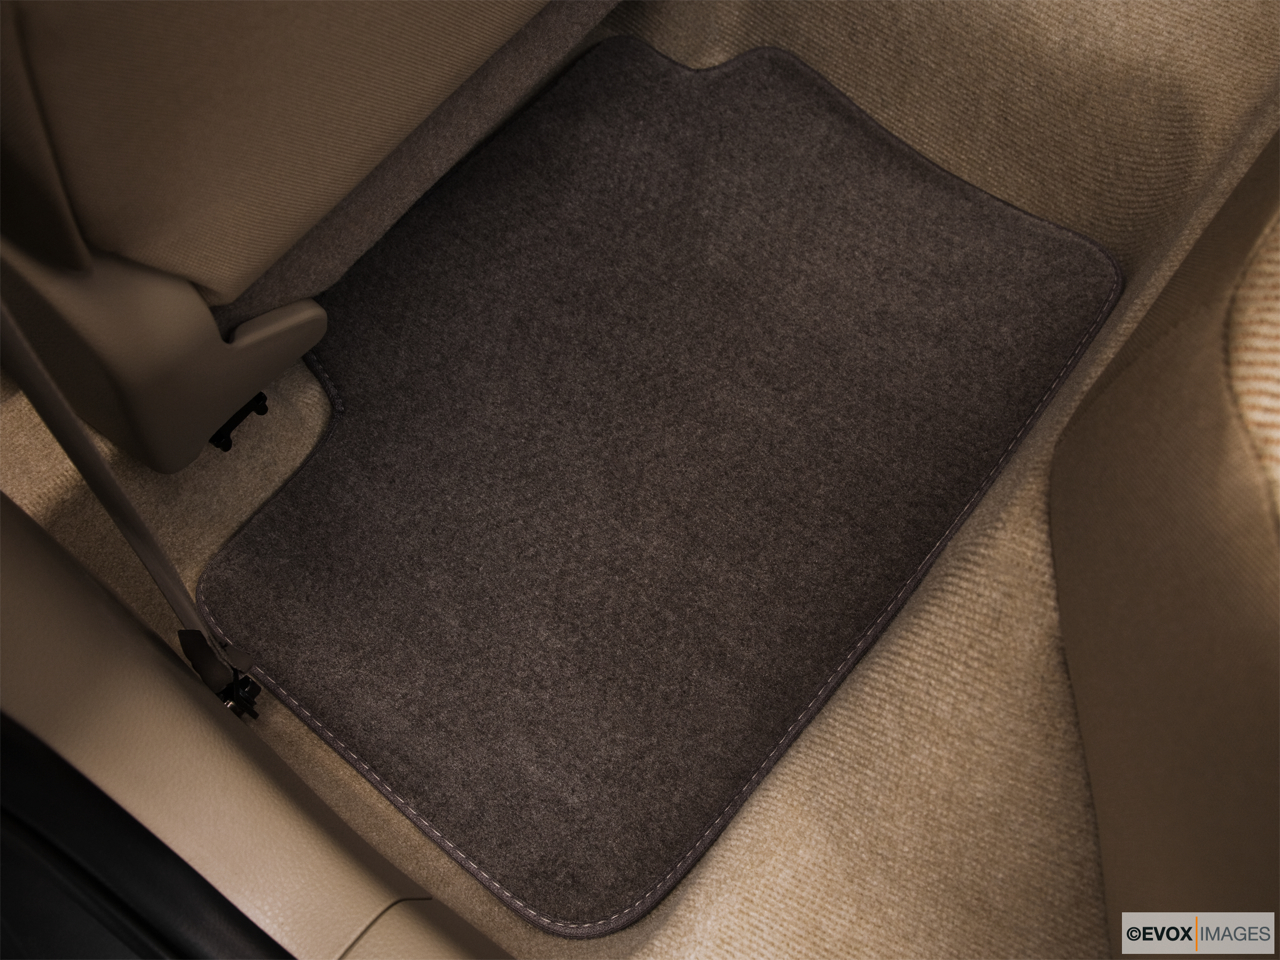 2010 Suzuki SX4 LE Popular Rear driver's side floor mat. Mid-seat level from outside looking in. 